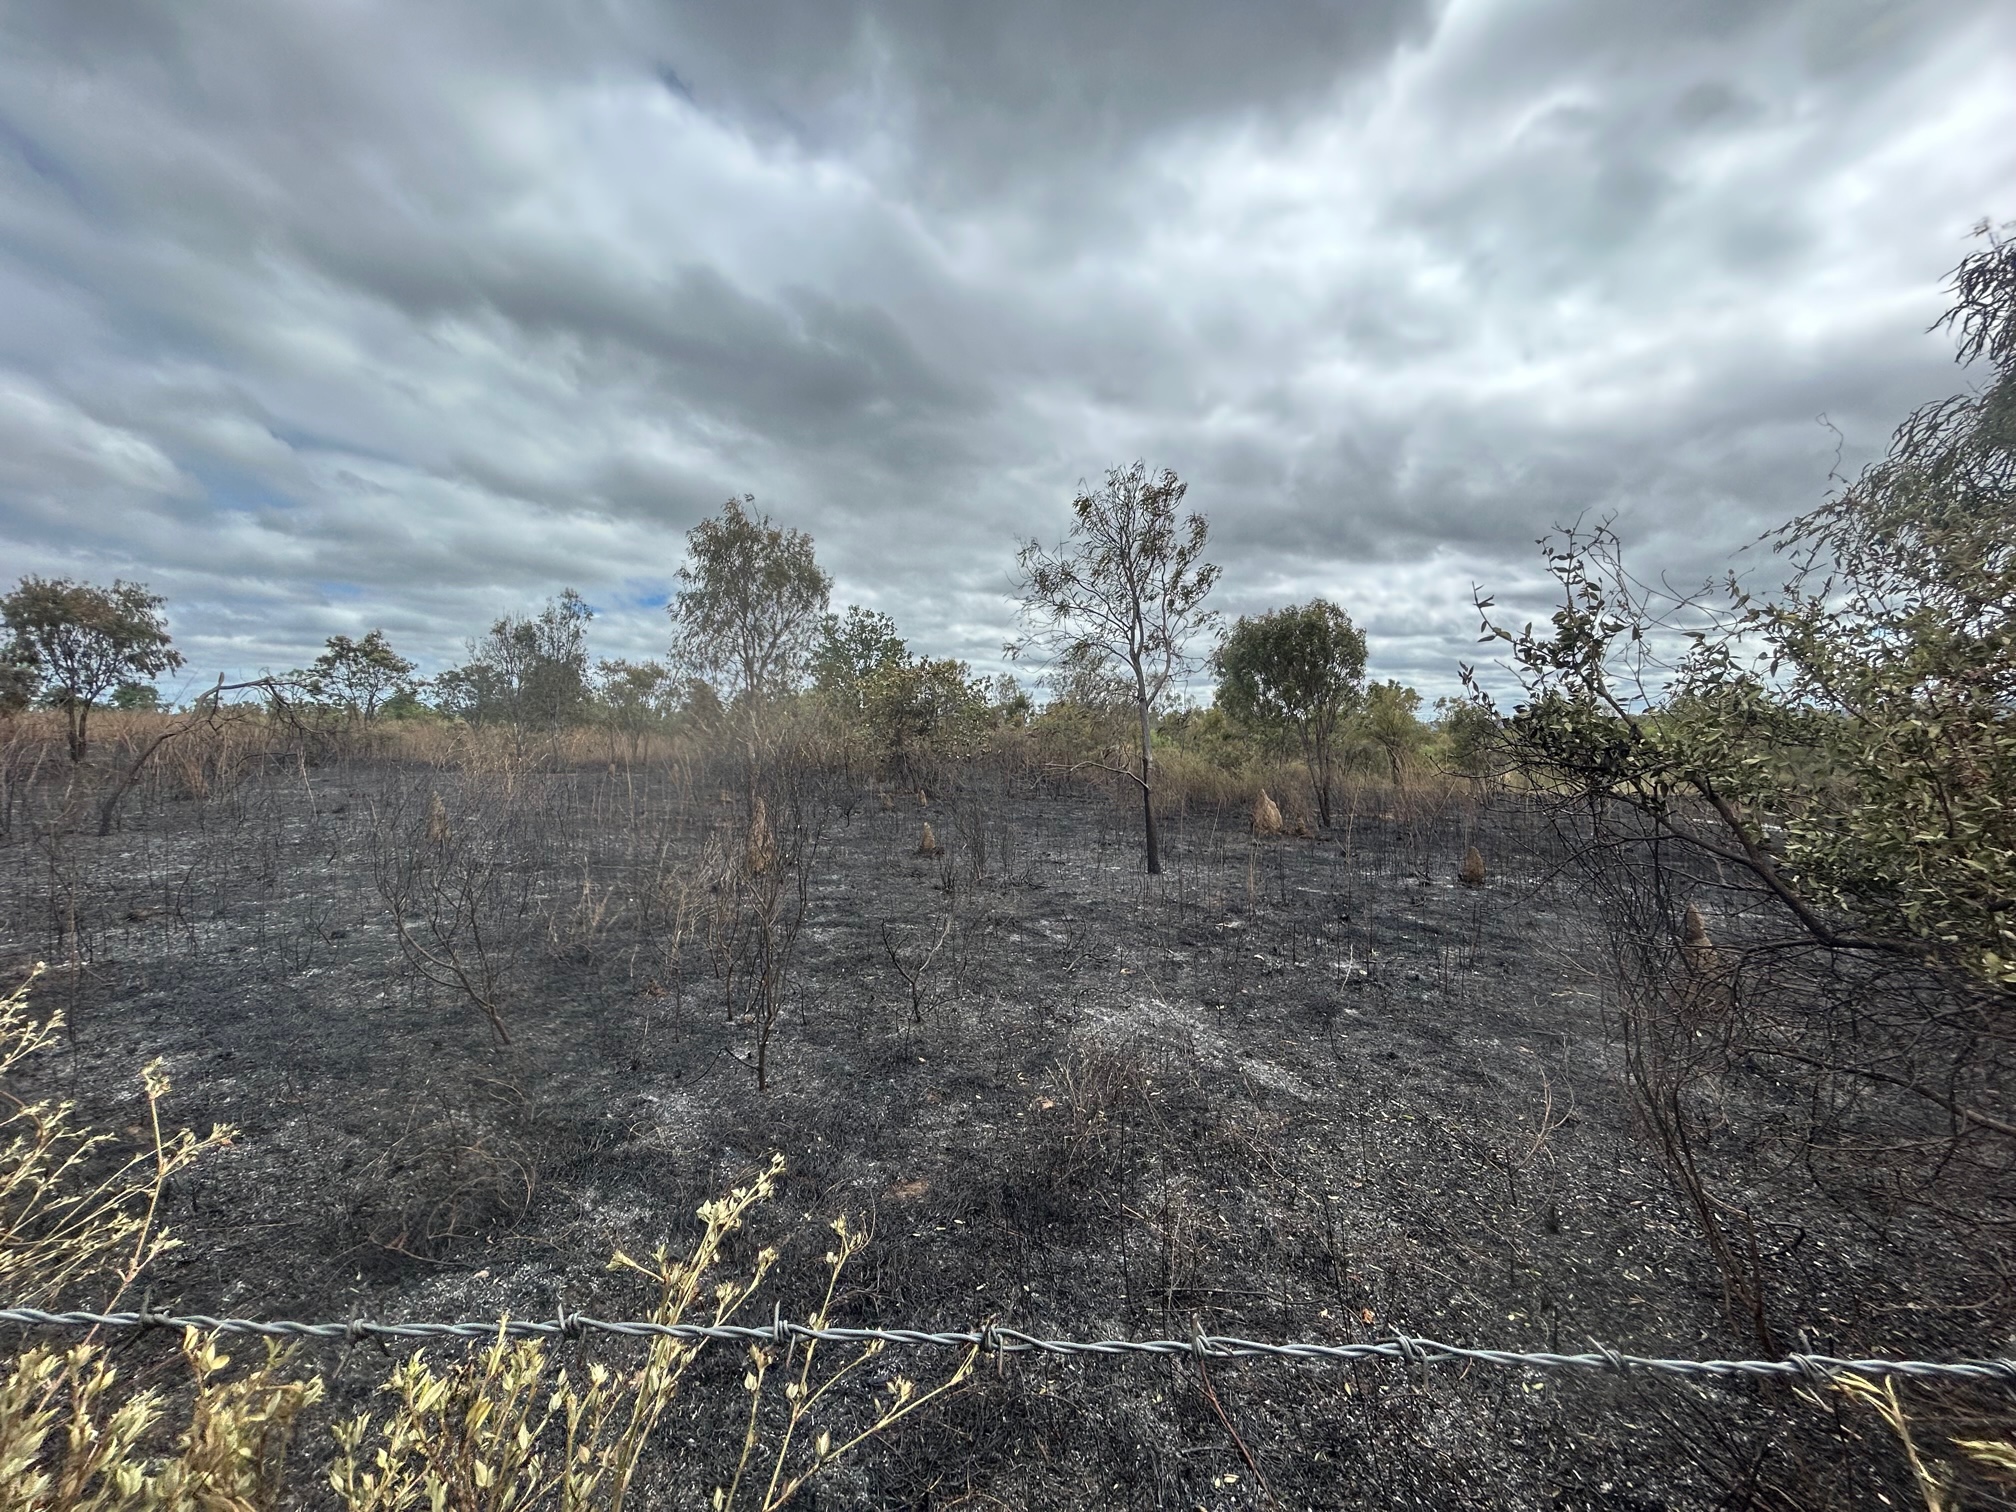 Burnt country showing removal of weeds but trees still intact